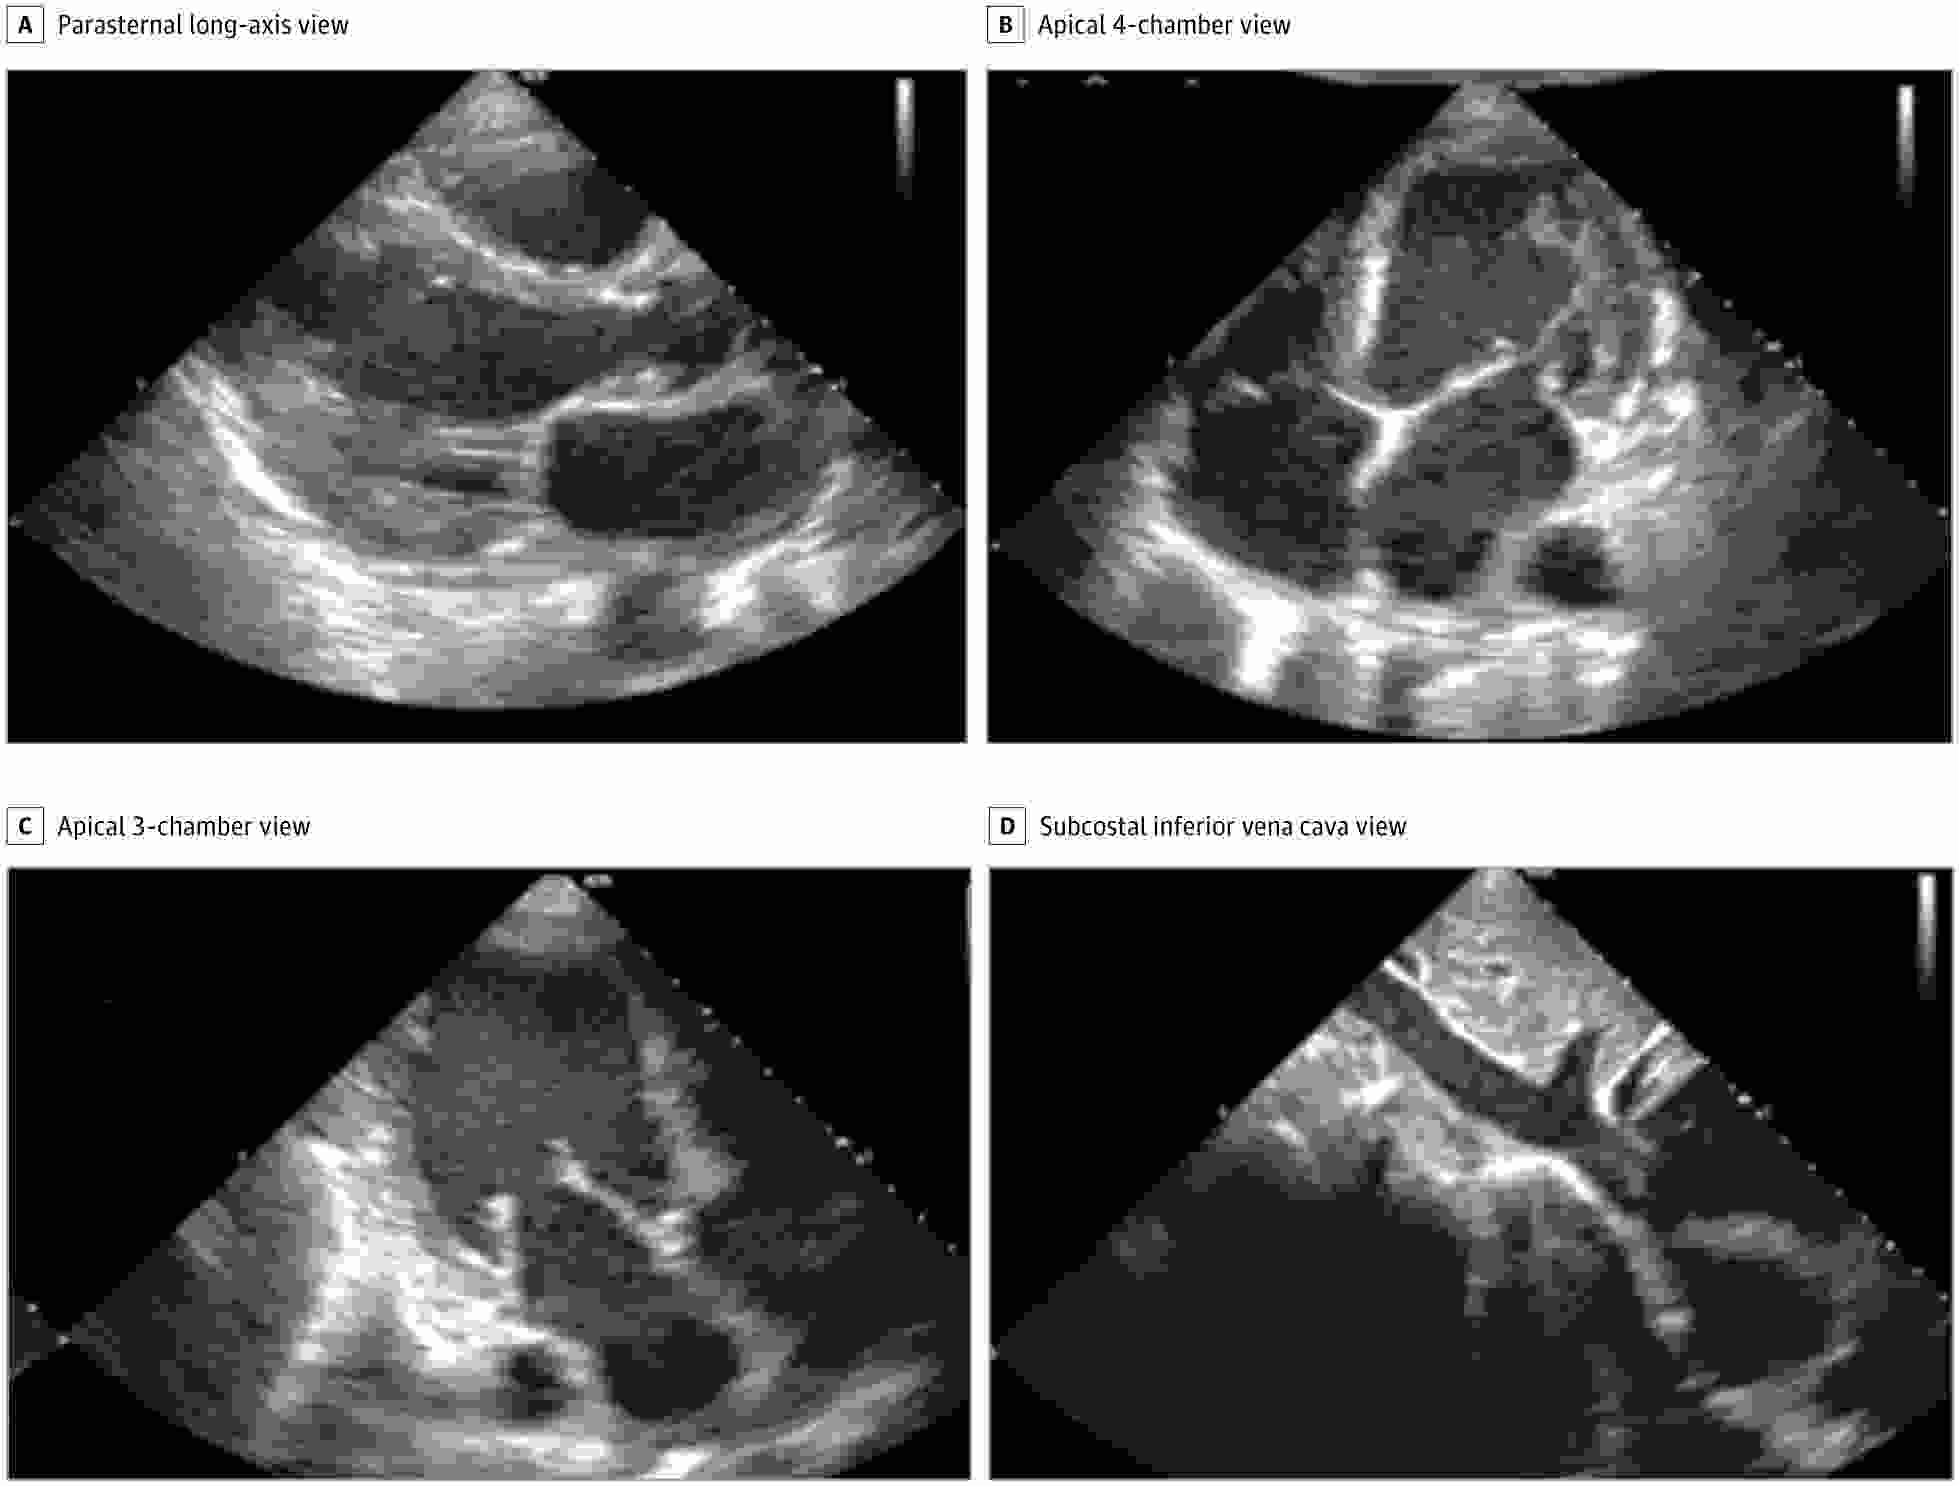 Still images of standard transthoracic echocardiographic views acquired by a nurse using the deep-learning algorithm were judged to be of diagnostic quality